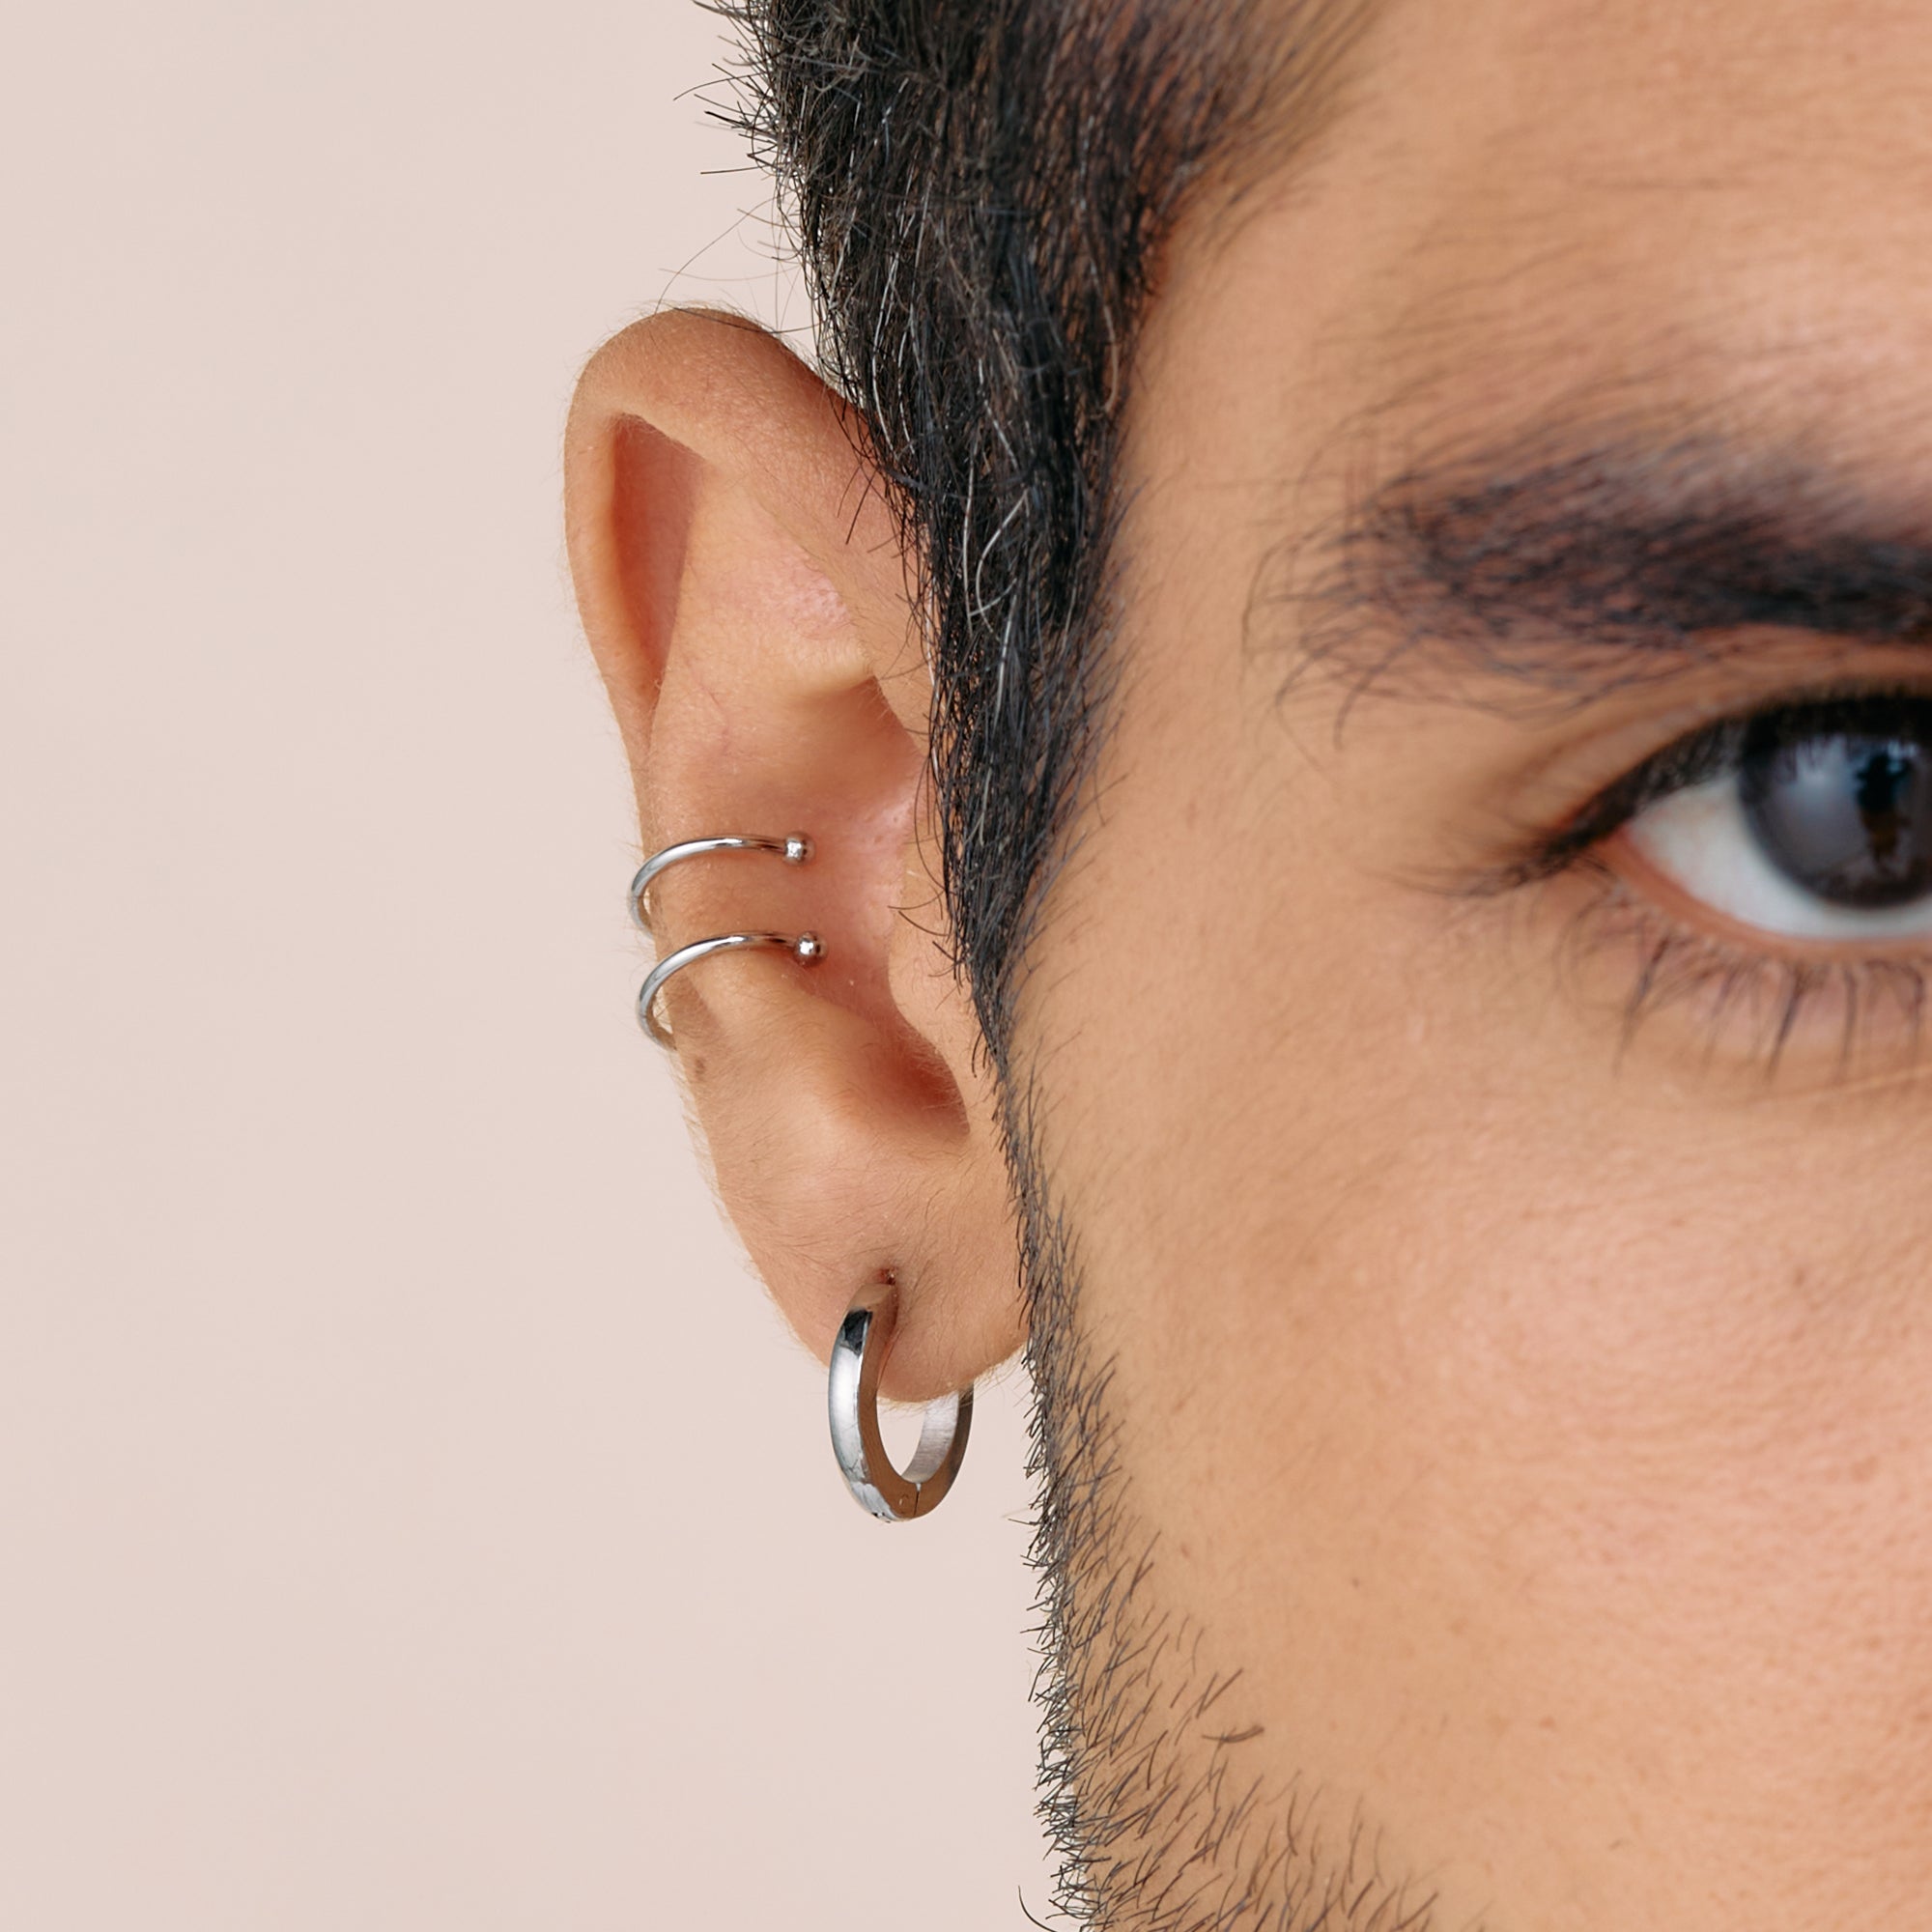 Earcuff Double for Him